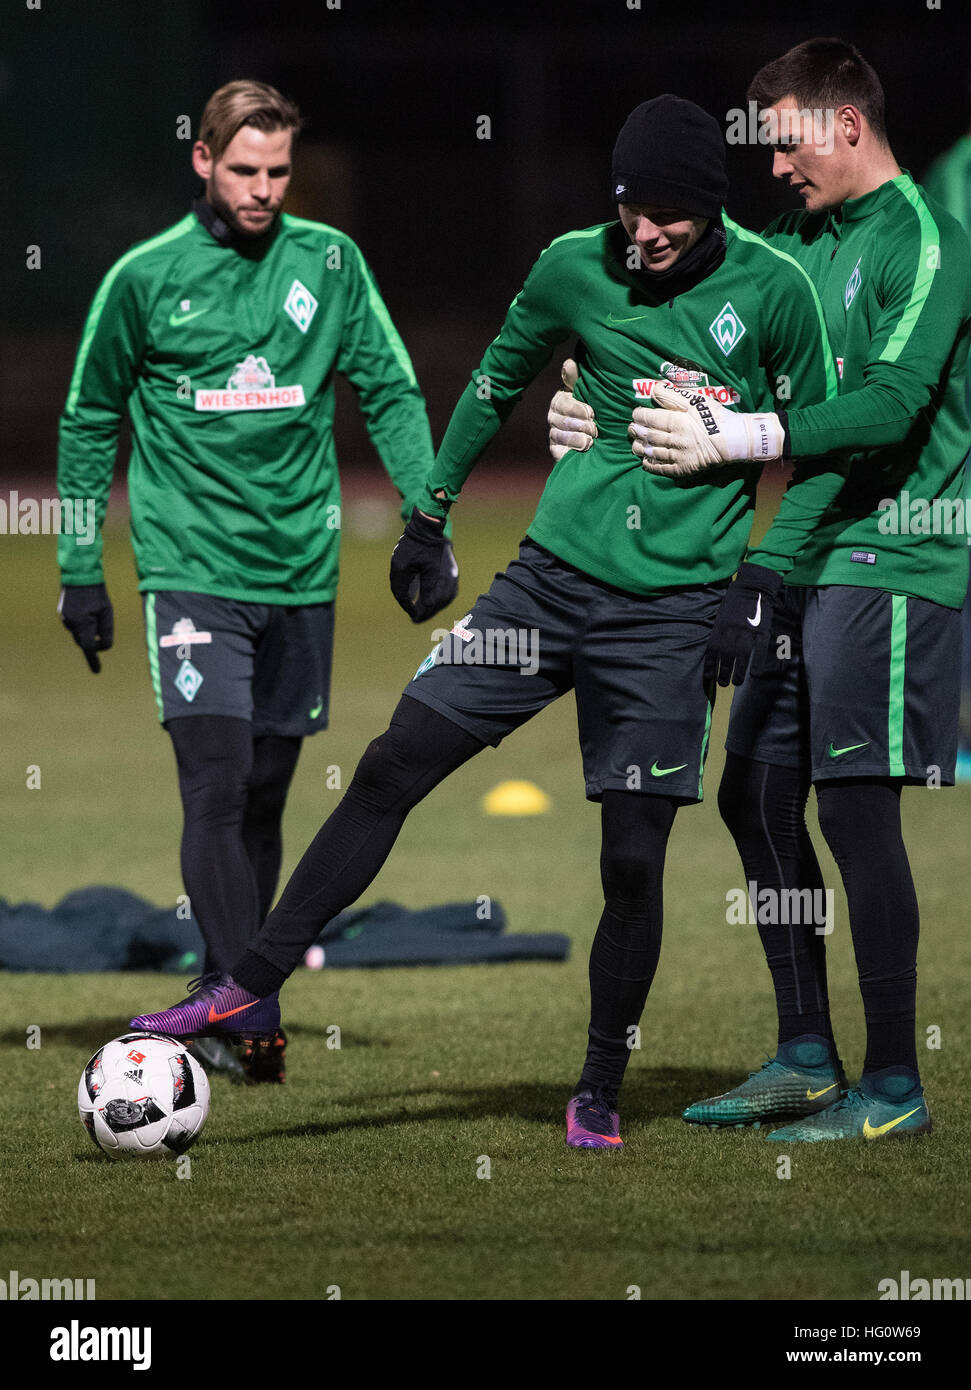 Bremen, Germany. 2nd Jan, 2017. Justin Eilers (l-r), Aron Johannsson and goalkeeper Michael Zetterer of the Bundesliga soccer club Werder Bremen in action during the first training session for the second half of the season in Bremen, Germany, 2 January 2017. Photo: Ingo Wagner/dpa/Alamy Live News Stock Photo